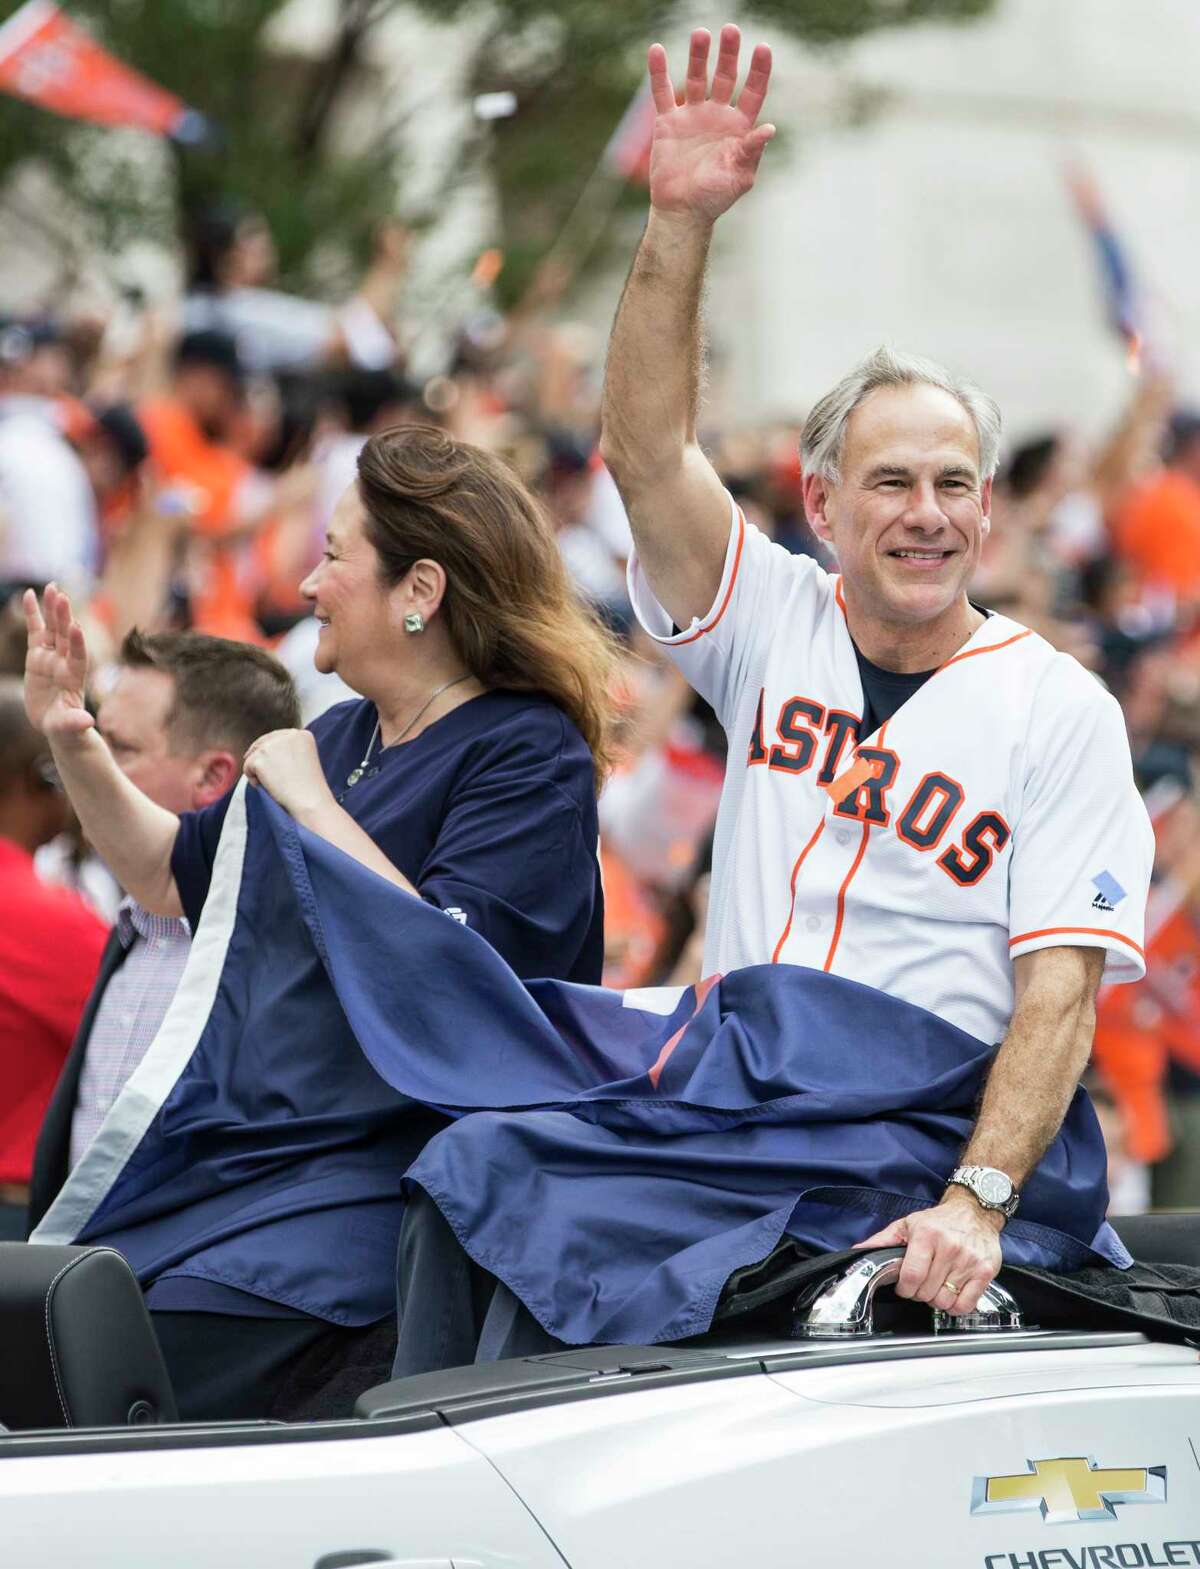 Gov. Greg Abbott waves to the crowd during the Astros World Series championship celebration parade on Friday, Nov. 3, 2017, in Houston.